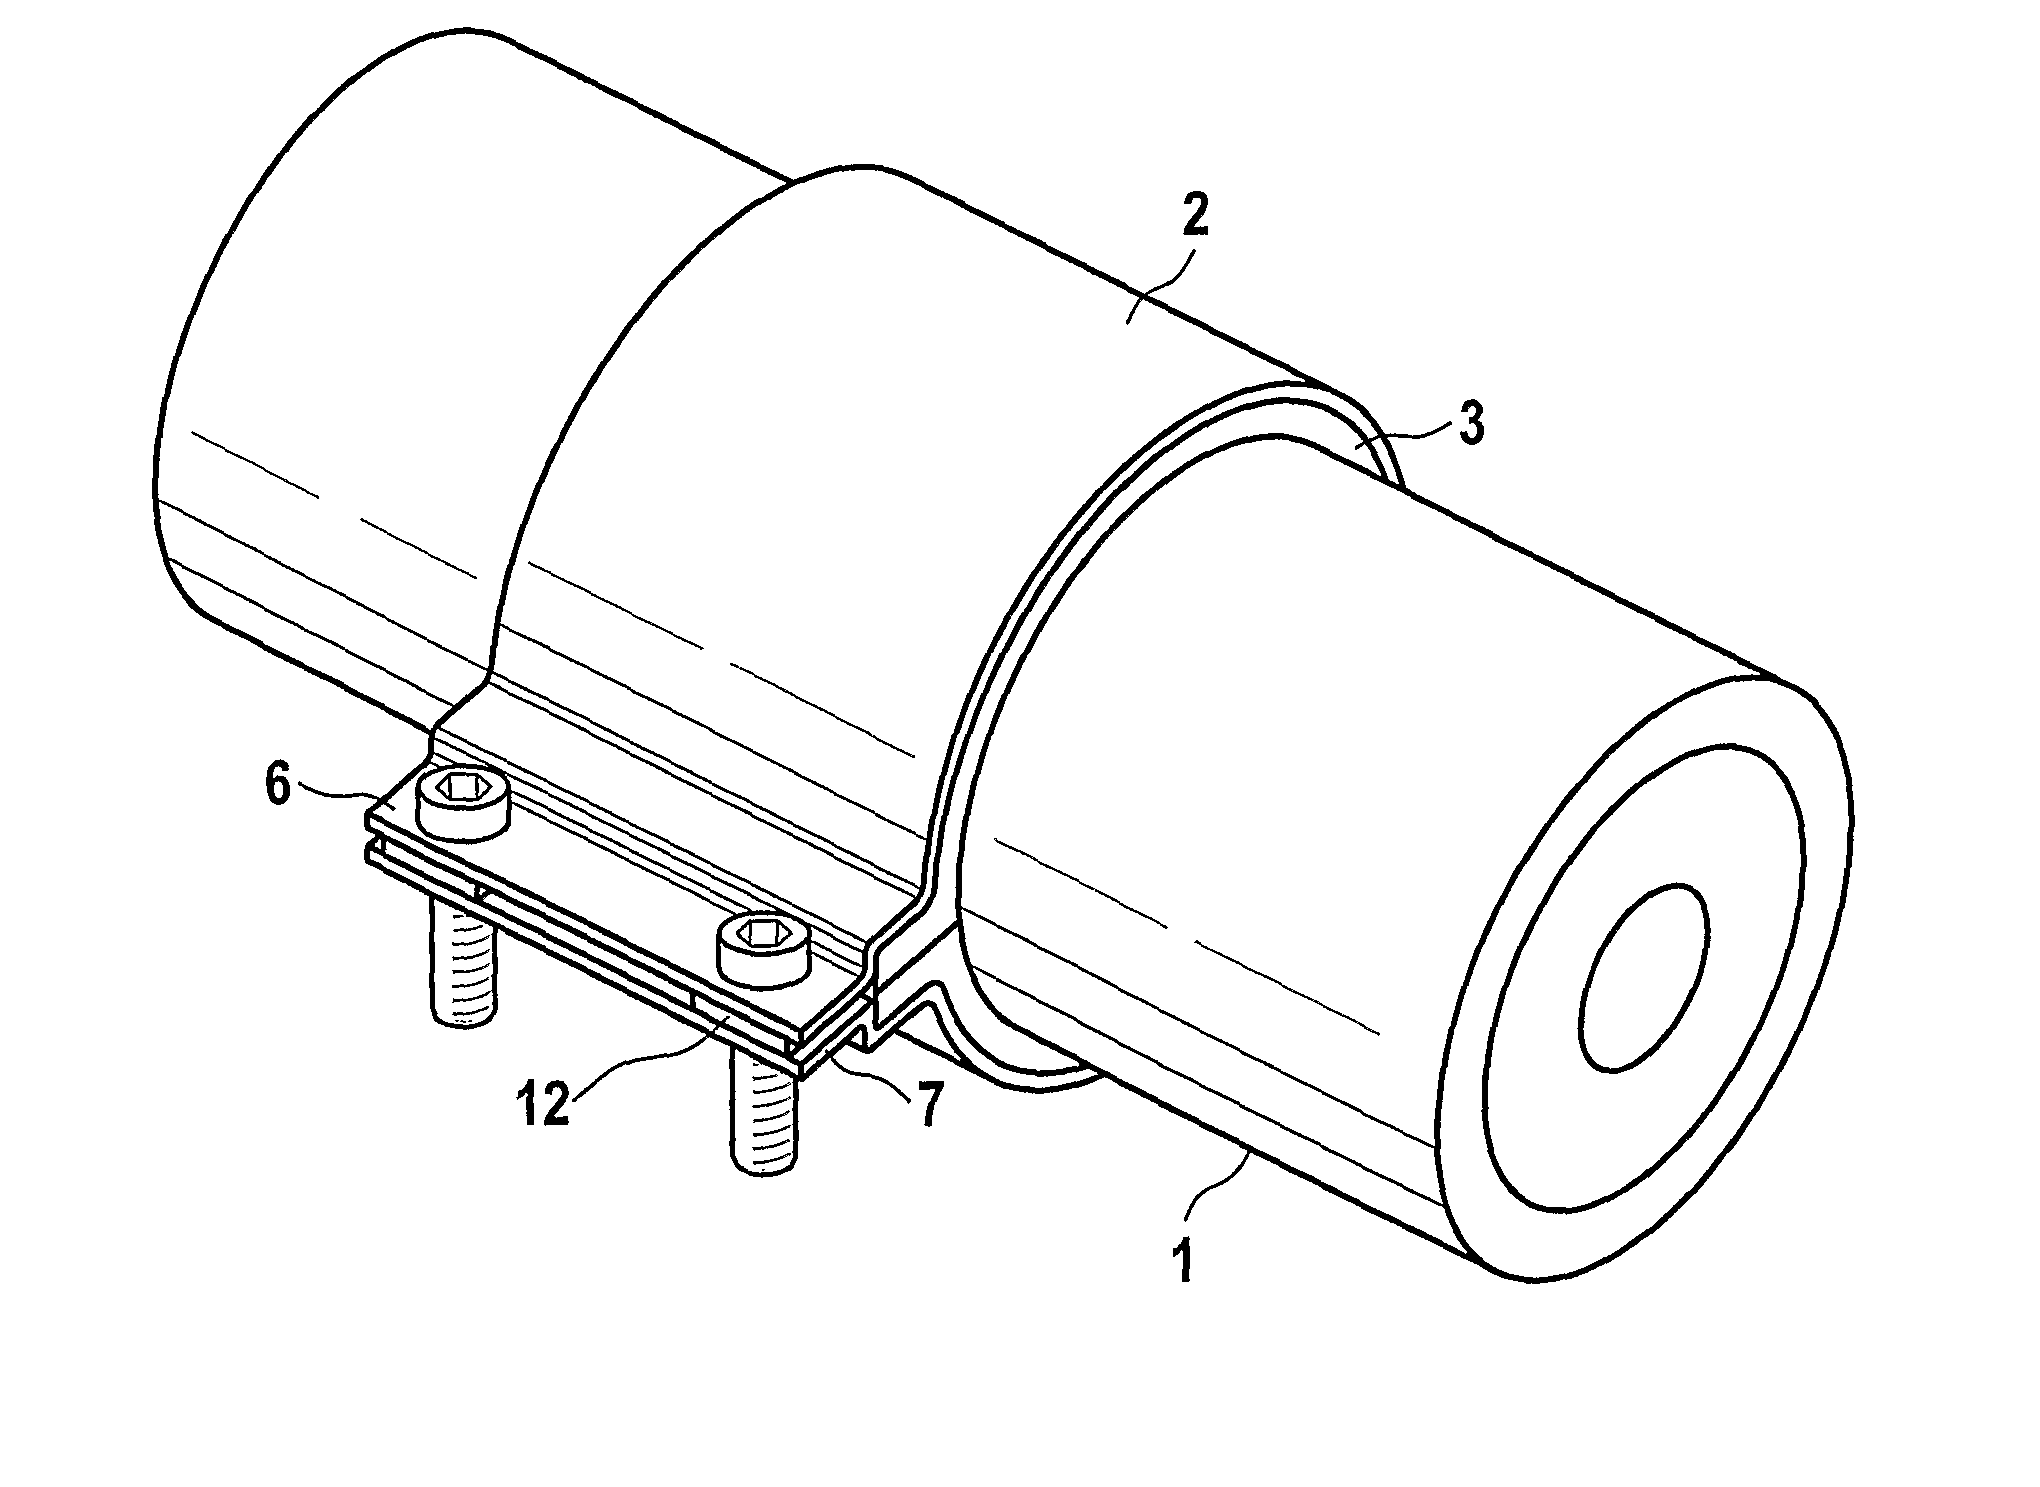 Device for electrically conductive contacting a pipe